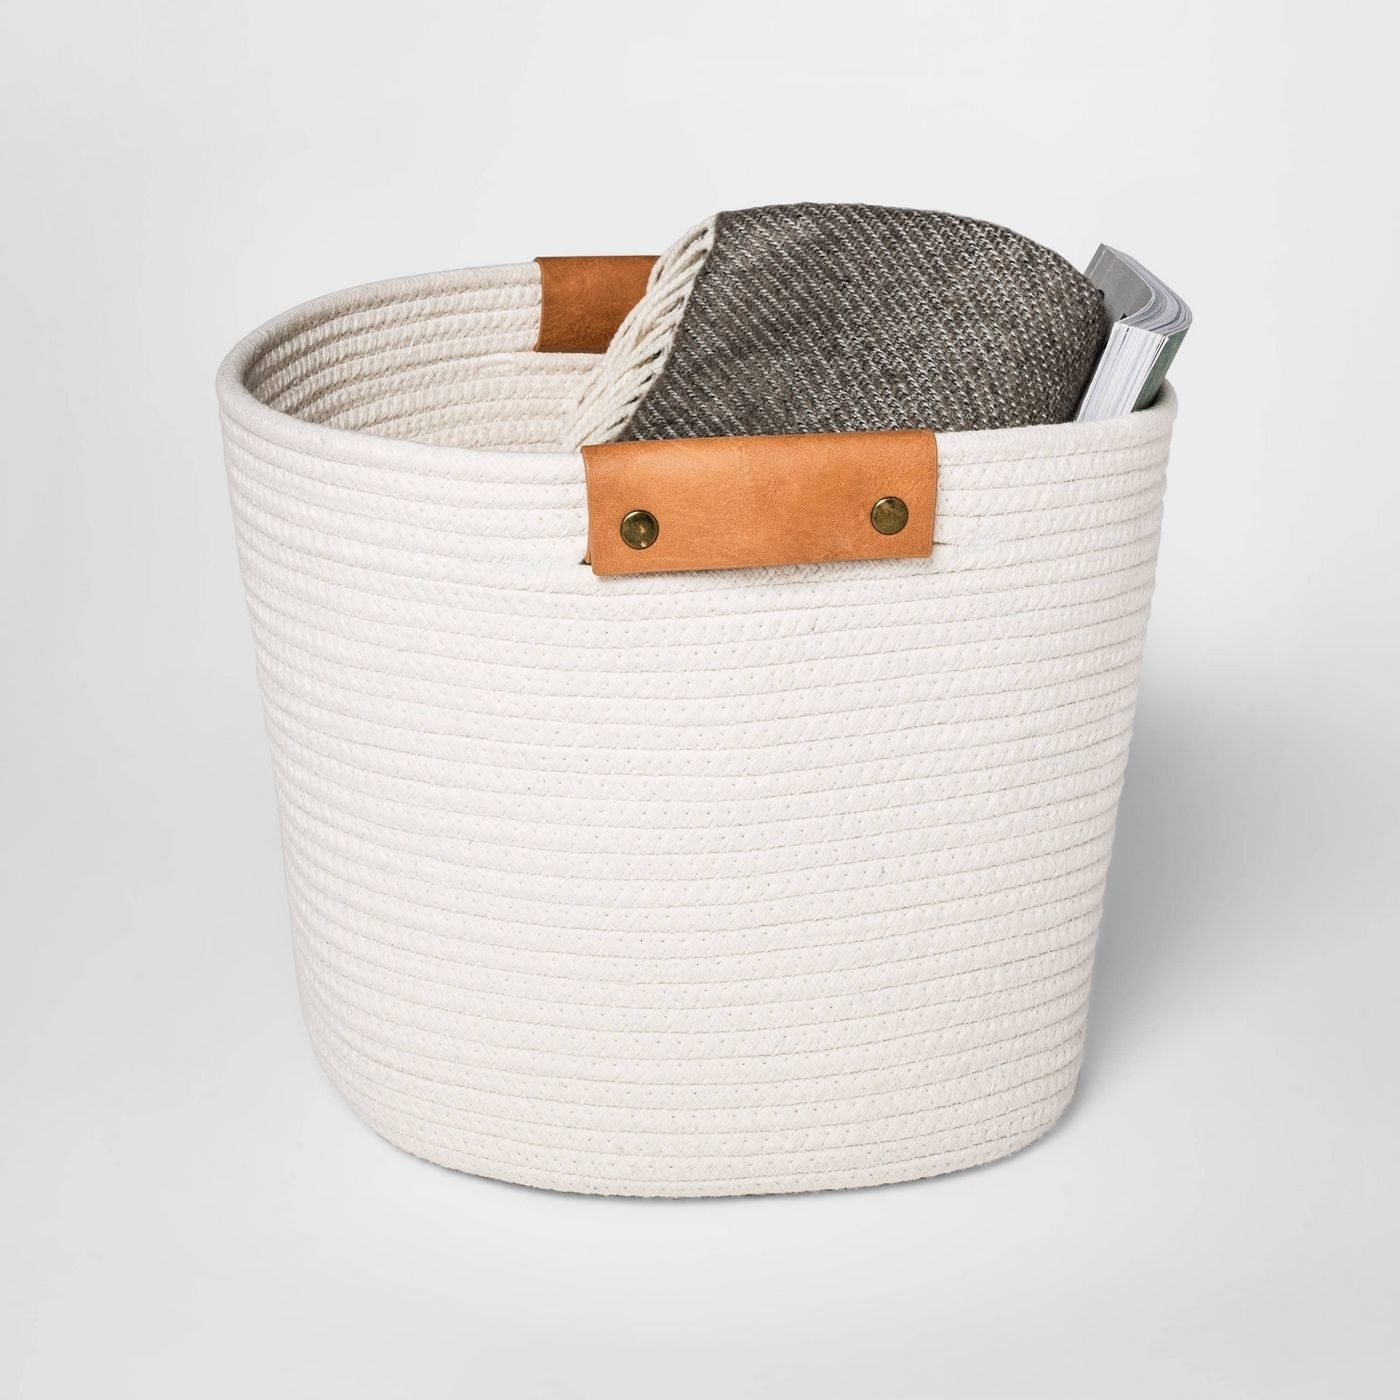 A coiled rope basket in a home